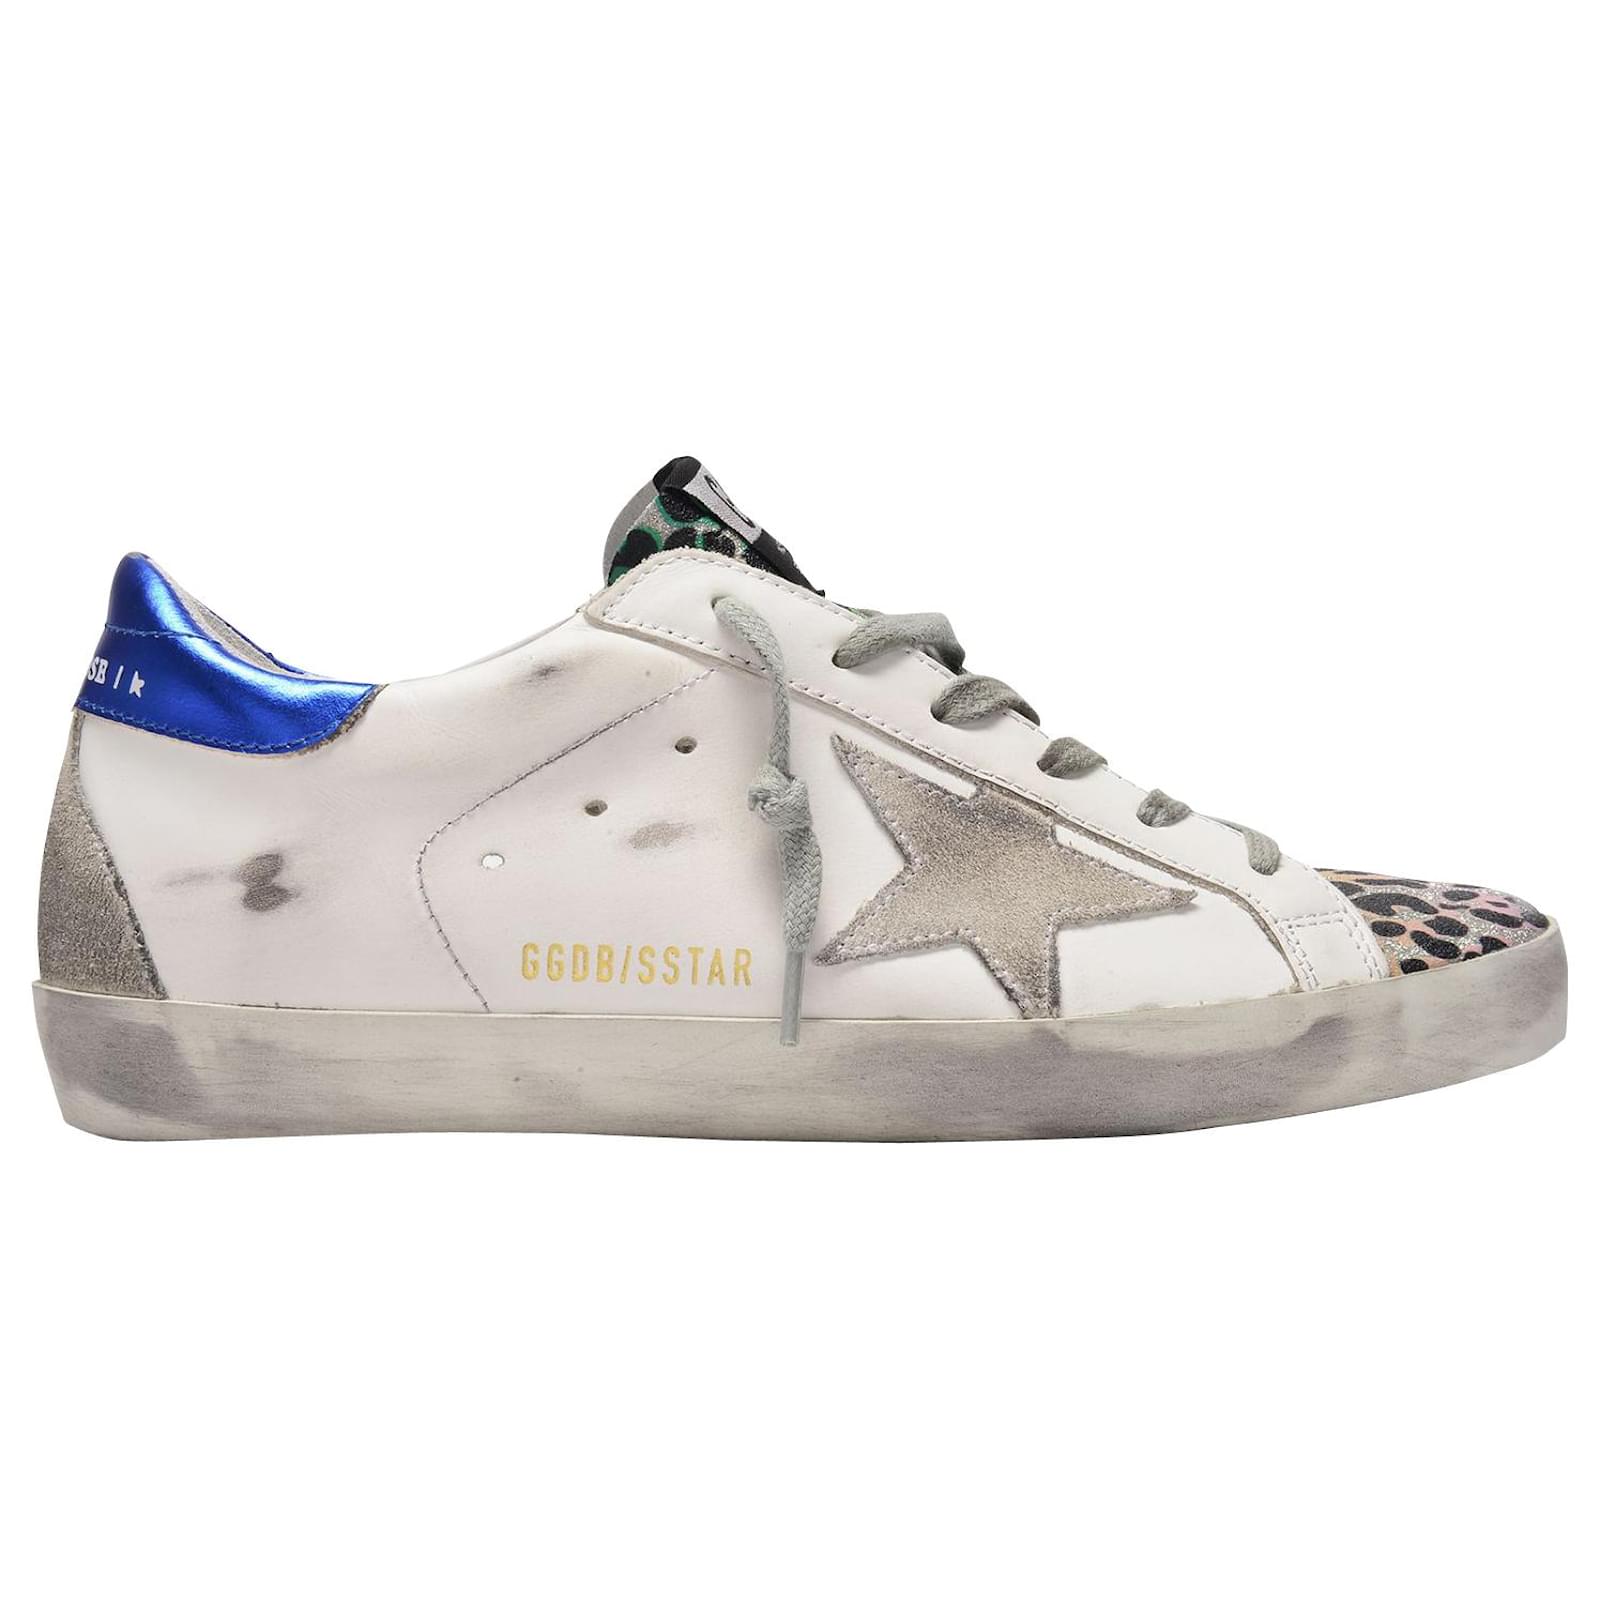 Golden Goose Super-Star Sneakers in White/Multicolored Leather ref ...